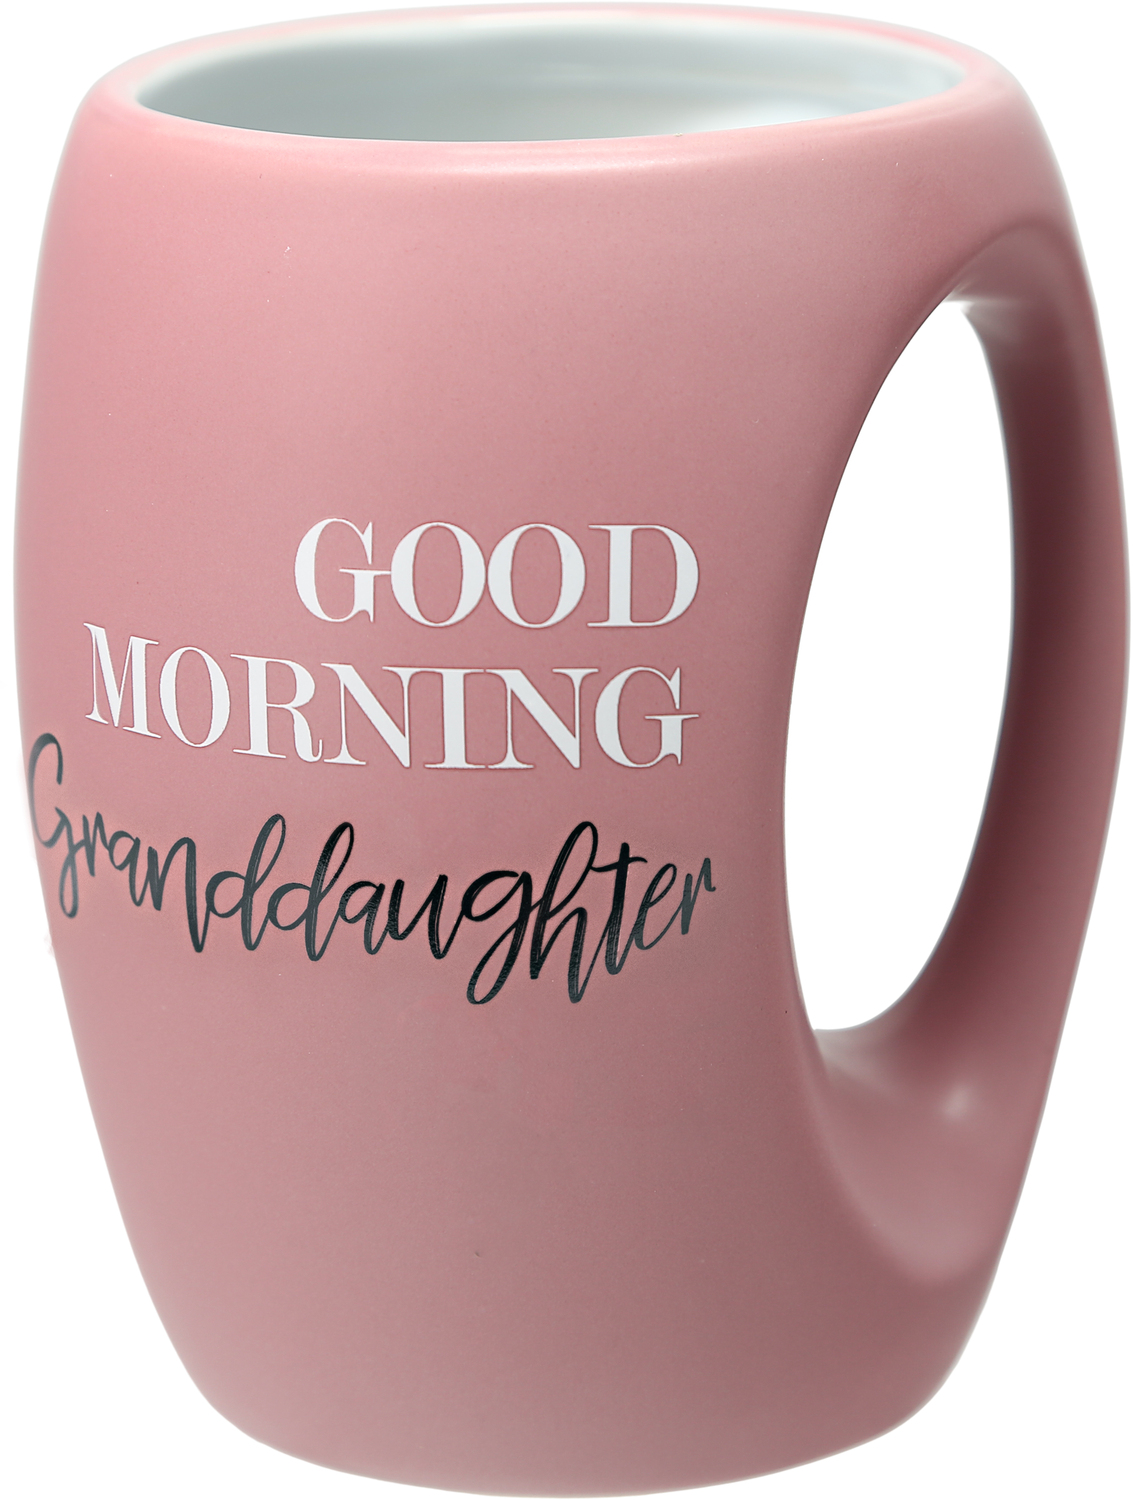 Granddaughter by Good Morning - Granddaughter - 16 oz Cup